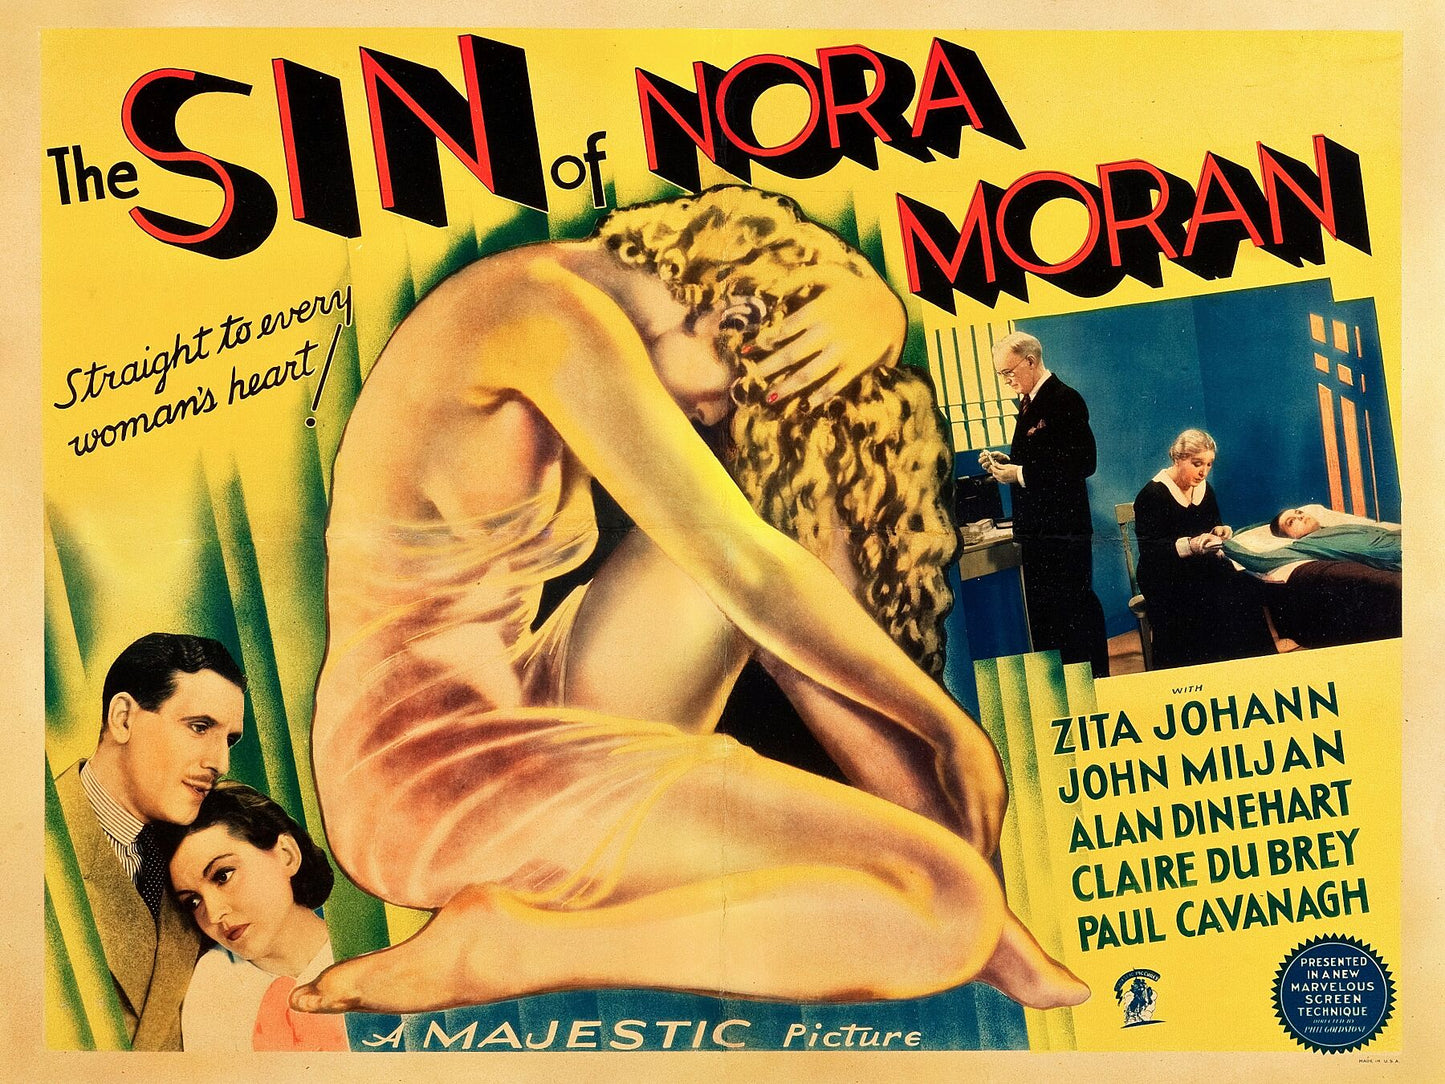 The Sin of Nora Moran is a 1933 American pre-code melodrama and proto-noir film directed by Phil Goldstone. The film is also known as Voice from the Grave (American reissue title).